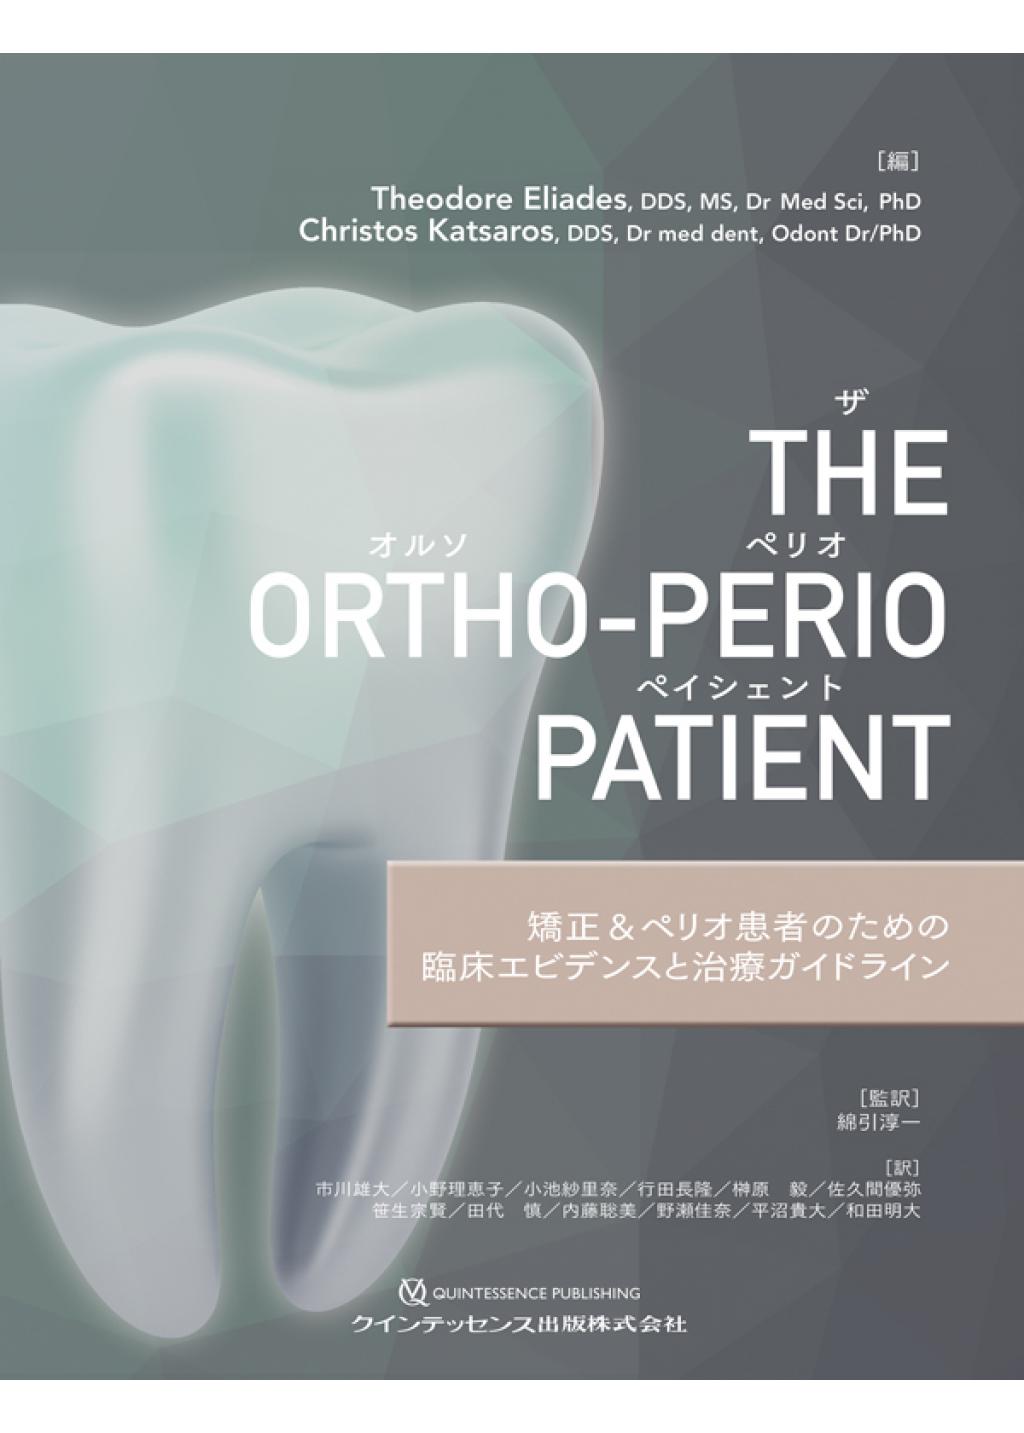 The Ortho-Perio Patient（ザ・オルソペリオペイシェント）の購入なら